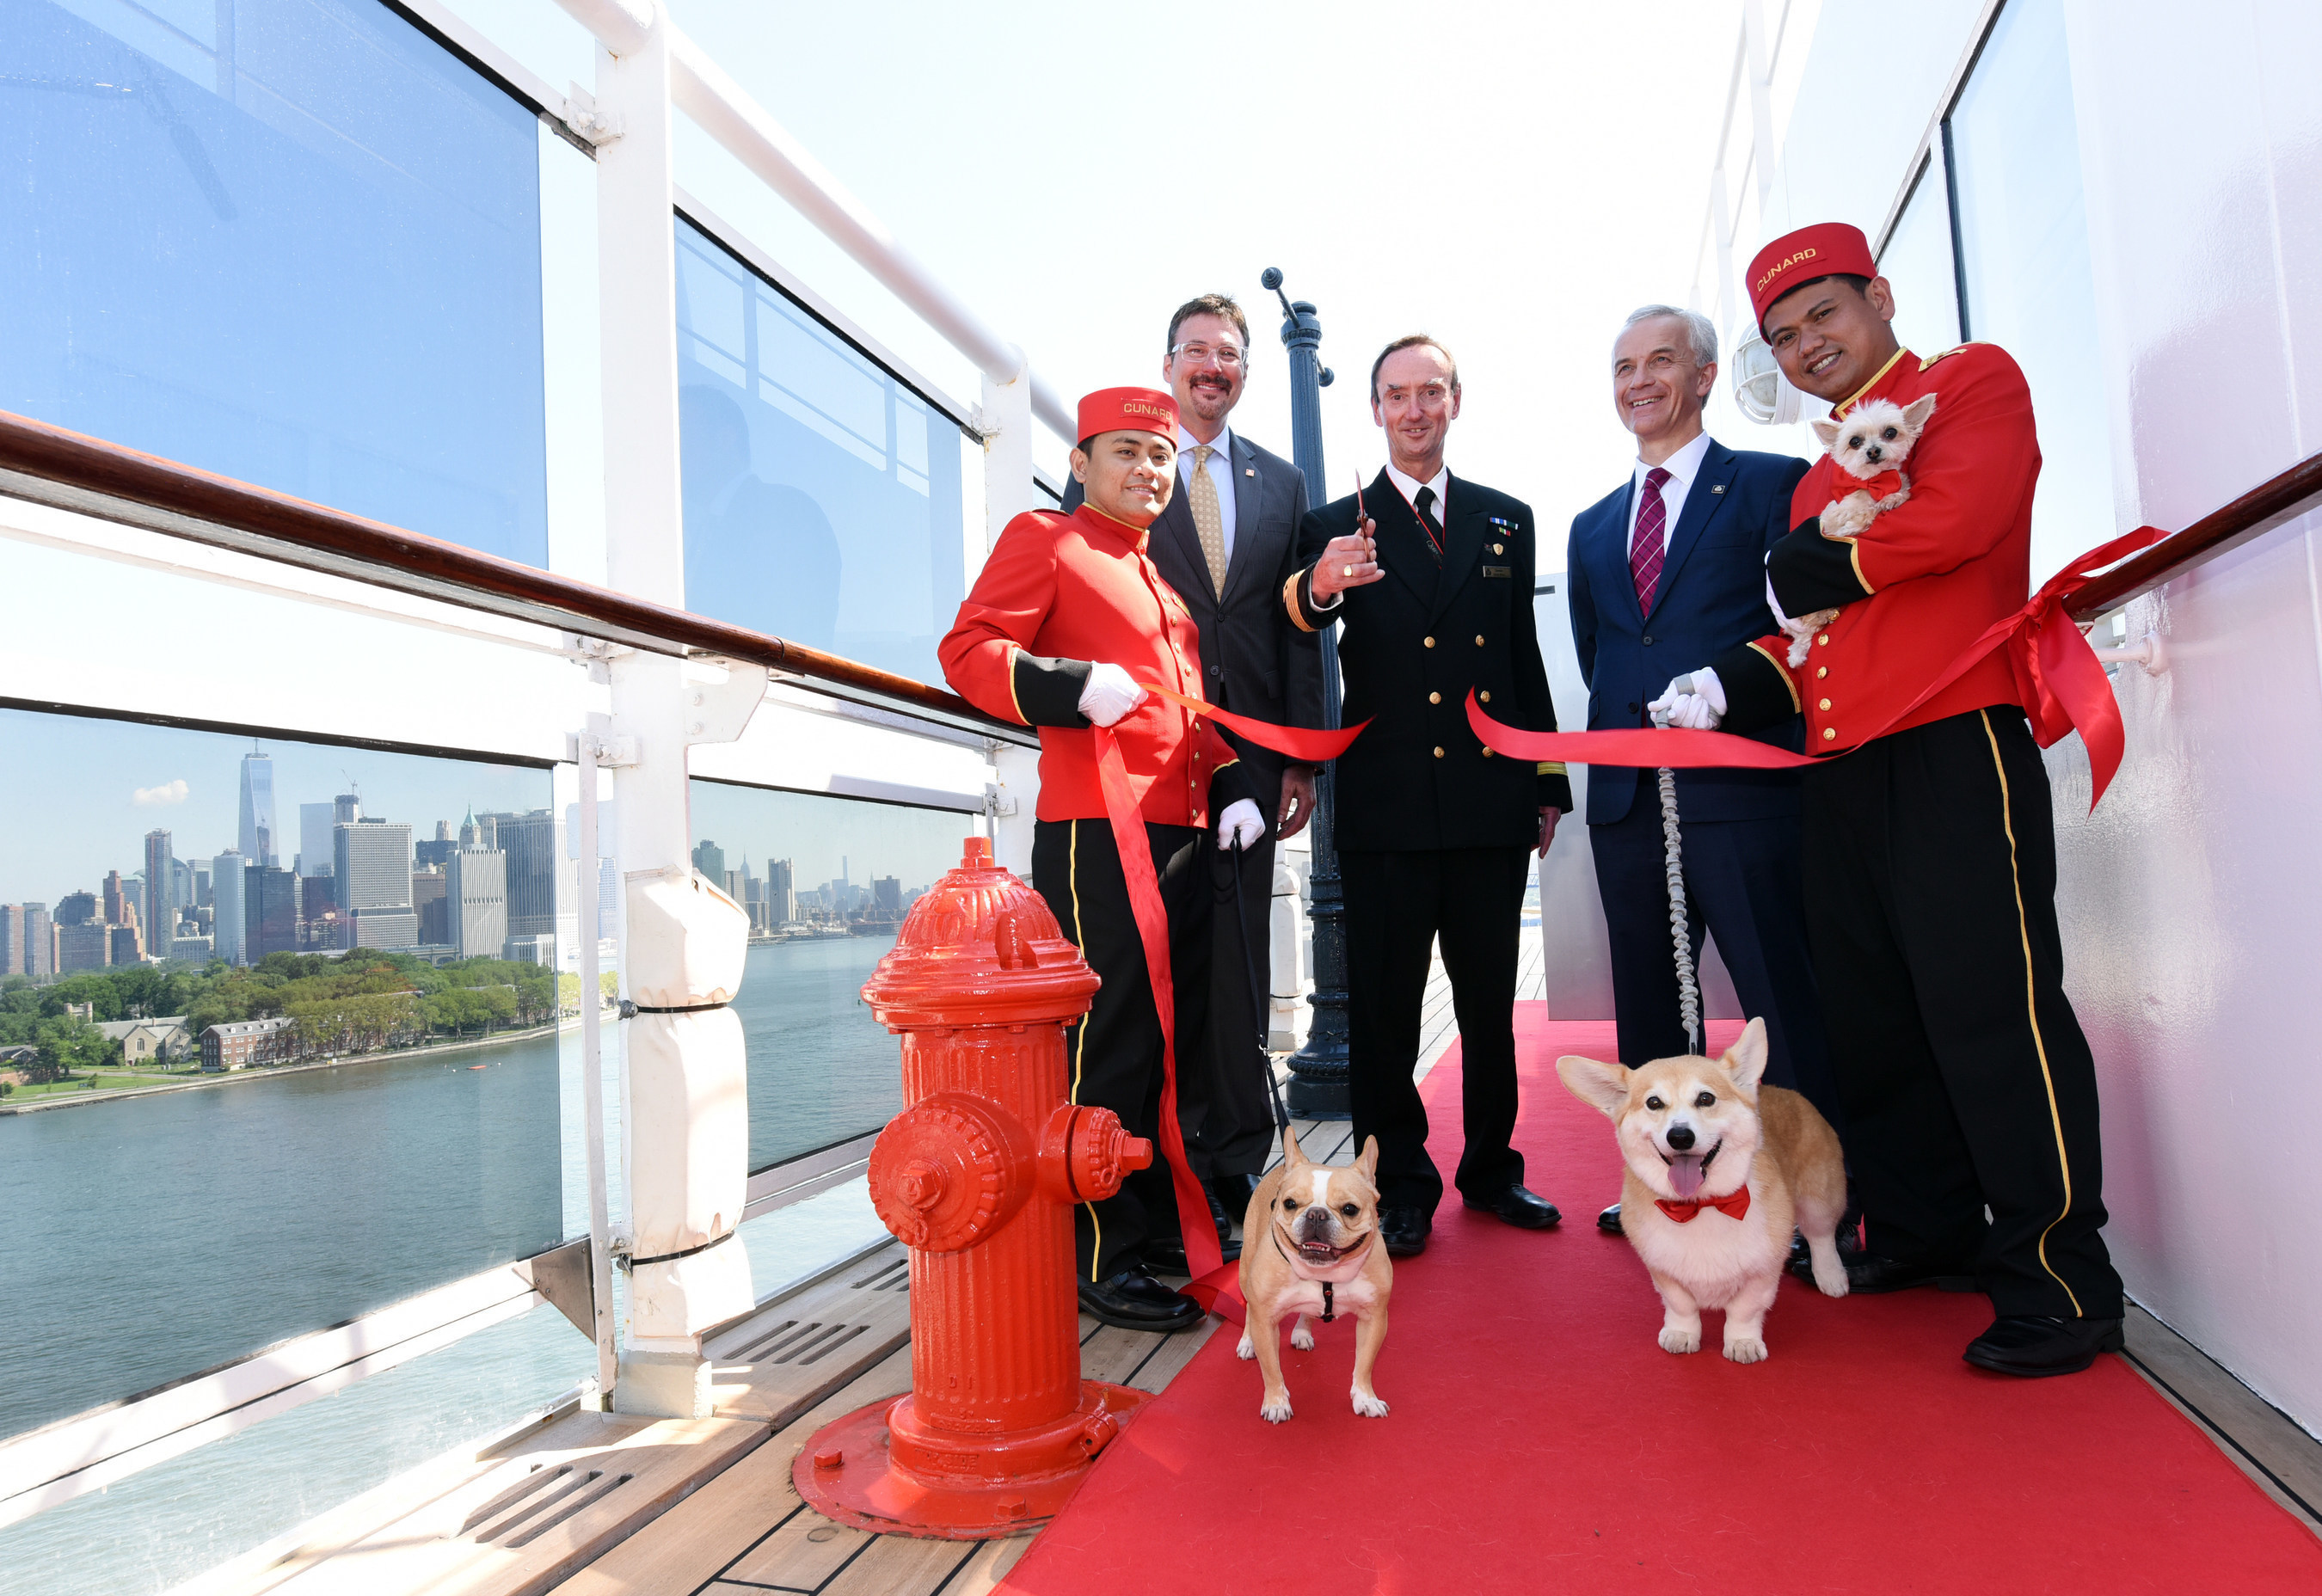 Richard Meadows, center left, President, Cunard, North America, Captain Christopher Wells, center, and David Noyes, center right, CEO, Cunard, joined by Cunard Kennel Masters, cut a ribbon to unveil the remastered kennels on the Queen Mary 2, the only passenger liner to carry pets. (Diane Bondareff/AP Images for Cunard)